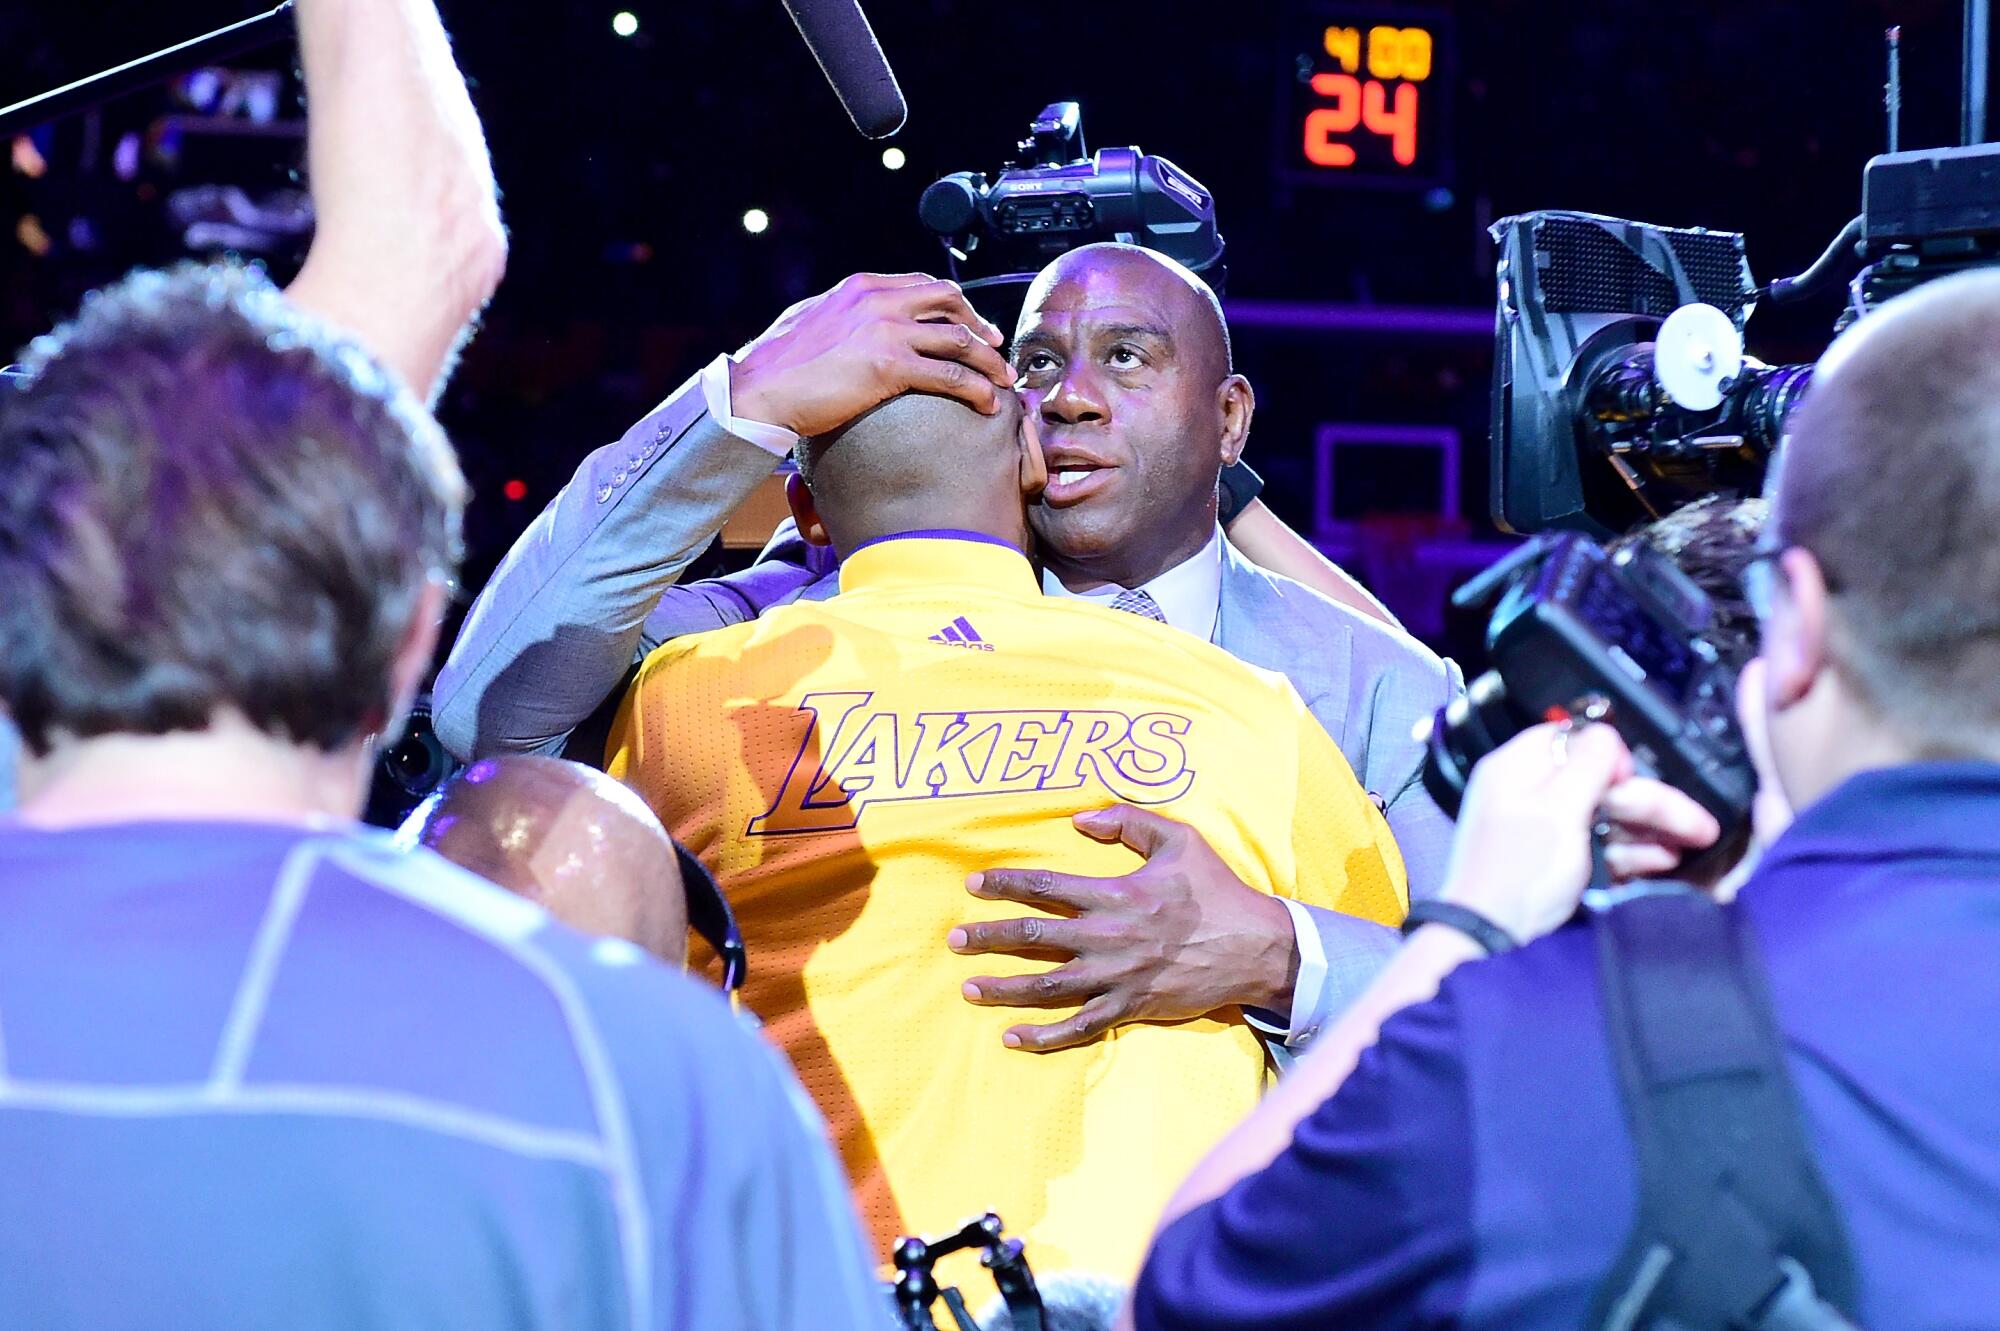 Magic Johnson hugs Kobe Bryant before his final game with the Lakers on April 13, 2016, at Staples Center.